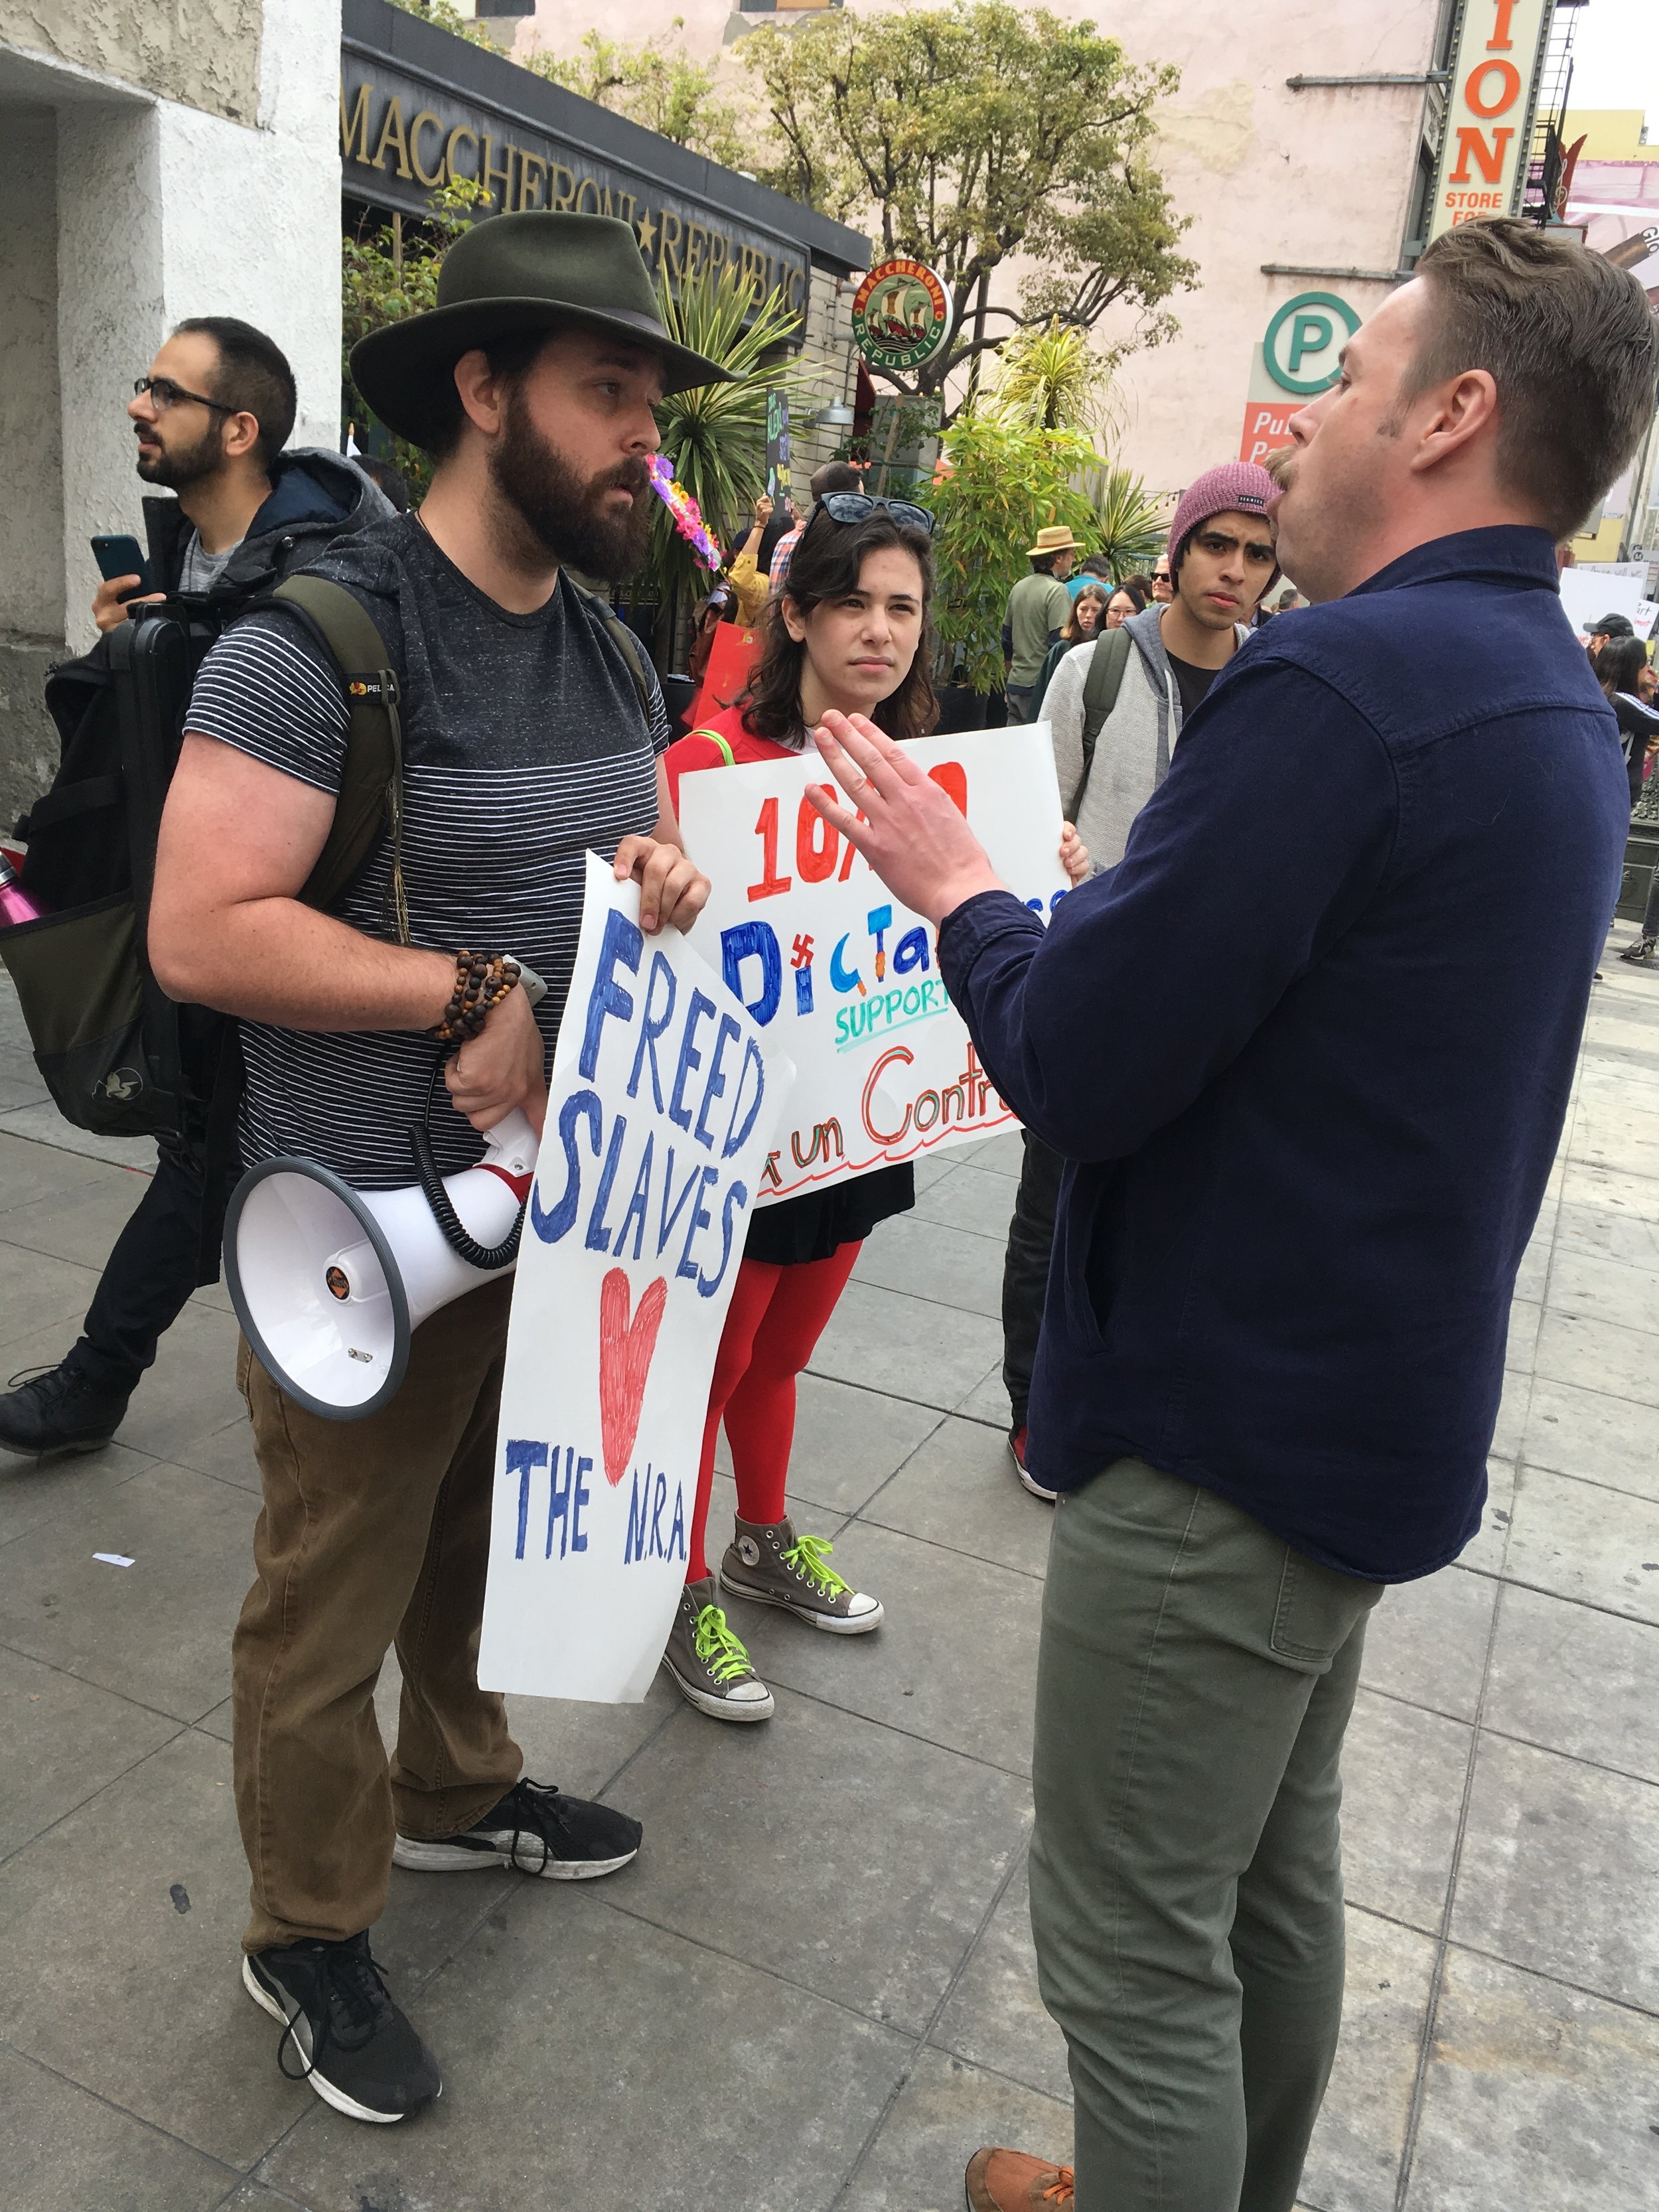  Santa Monica College student Ben Kolodny (left), with girlfriend Liberty Fuchs, debating with Spencer Thun about gun control. Kolodny didn't join the corner of counter-protestors at the March For Our Lives protest on March 24, 2018, in Los Angeles, 